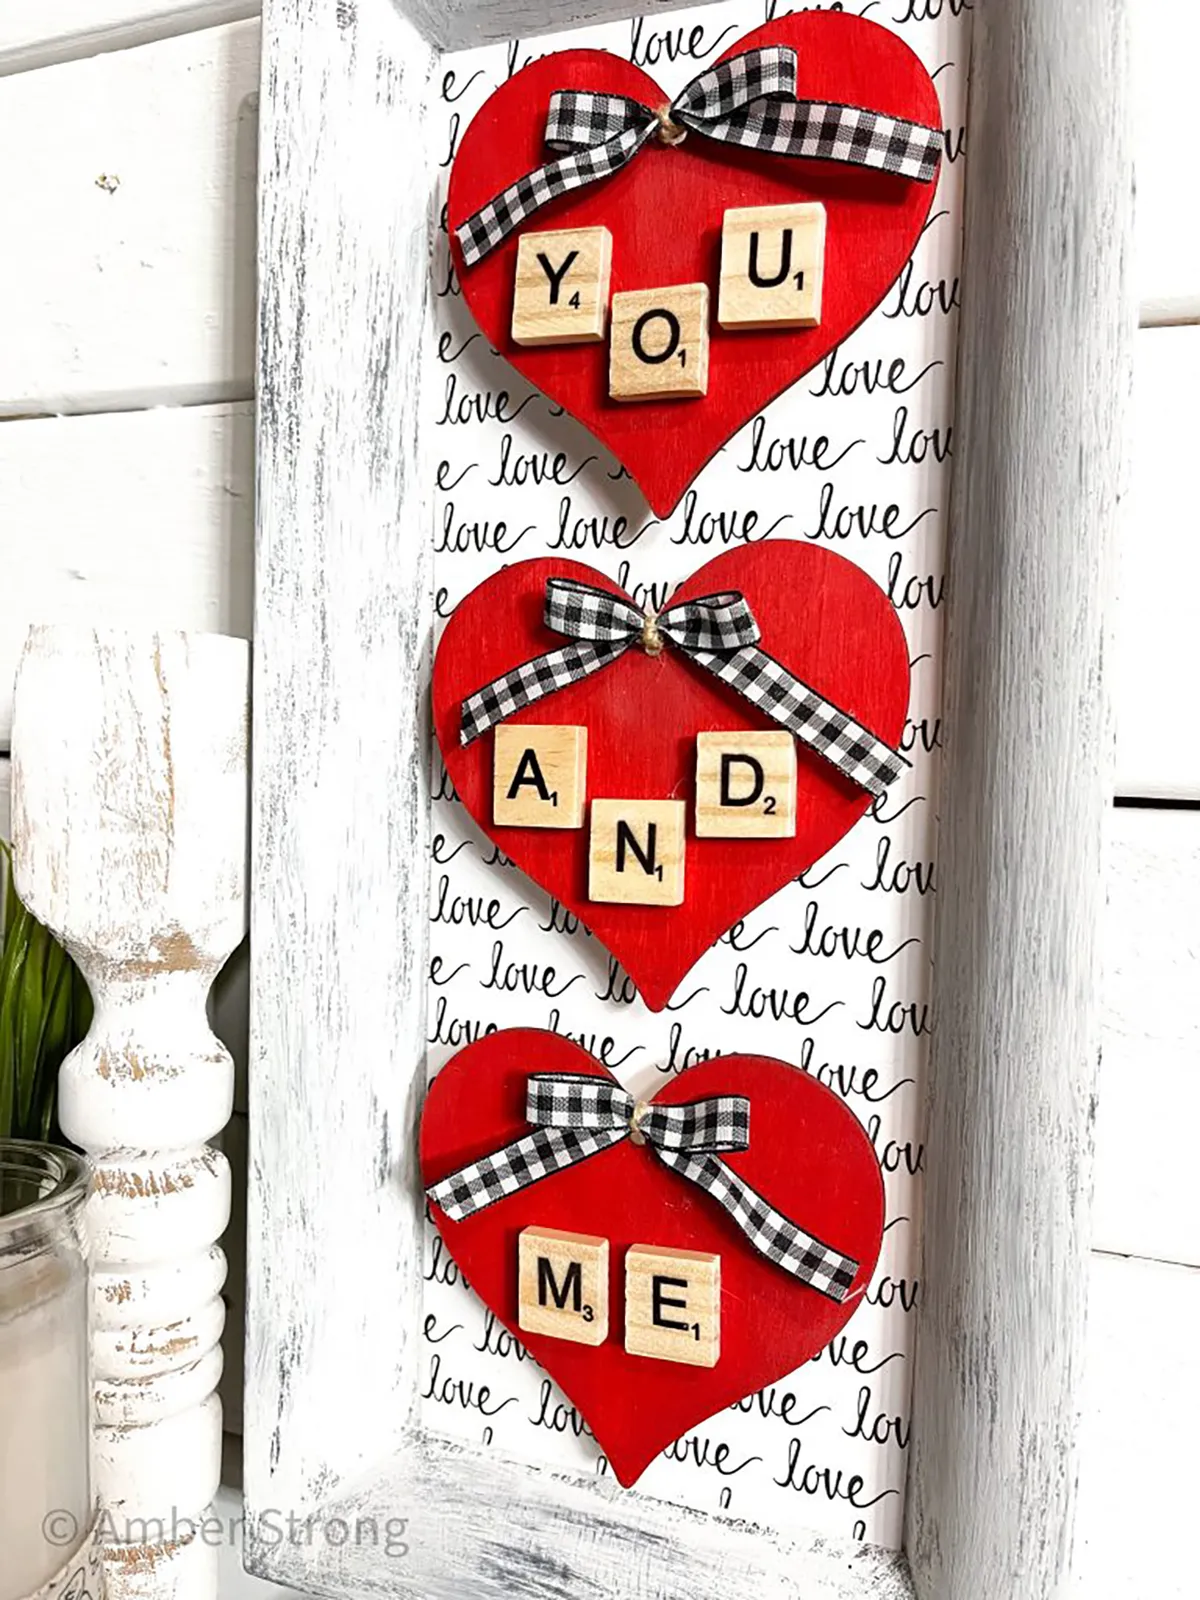 diy valentines decorations - frame with three red hears and scrabble tiles